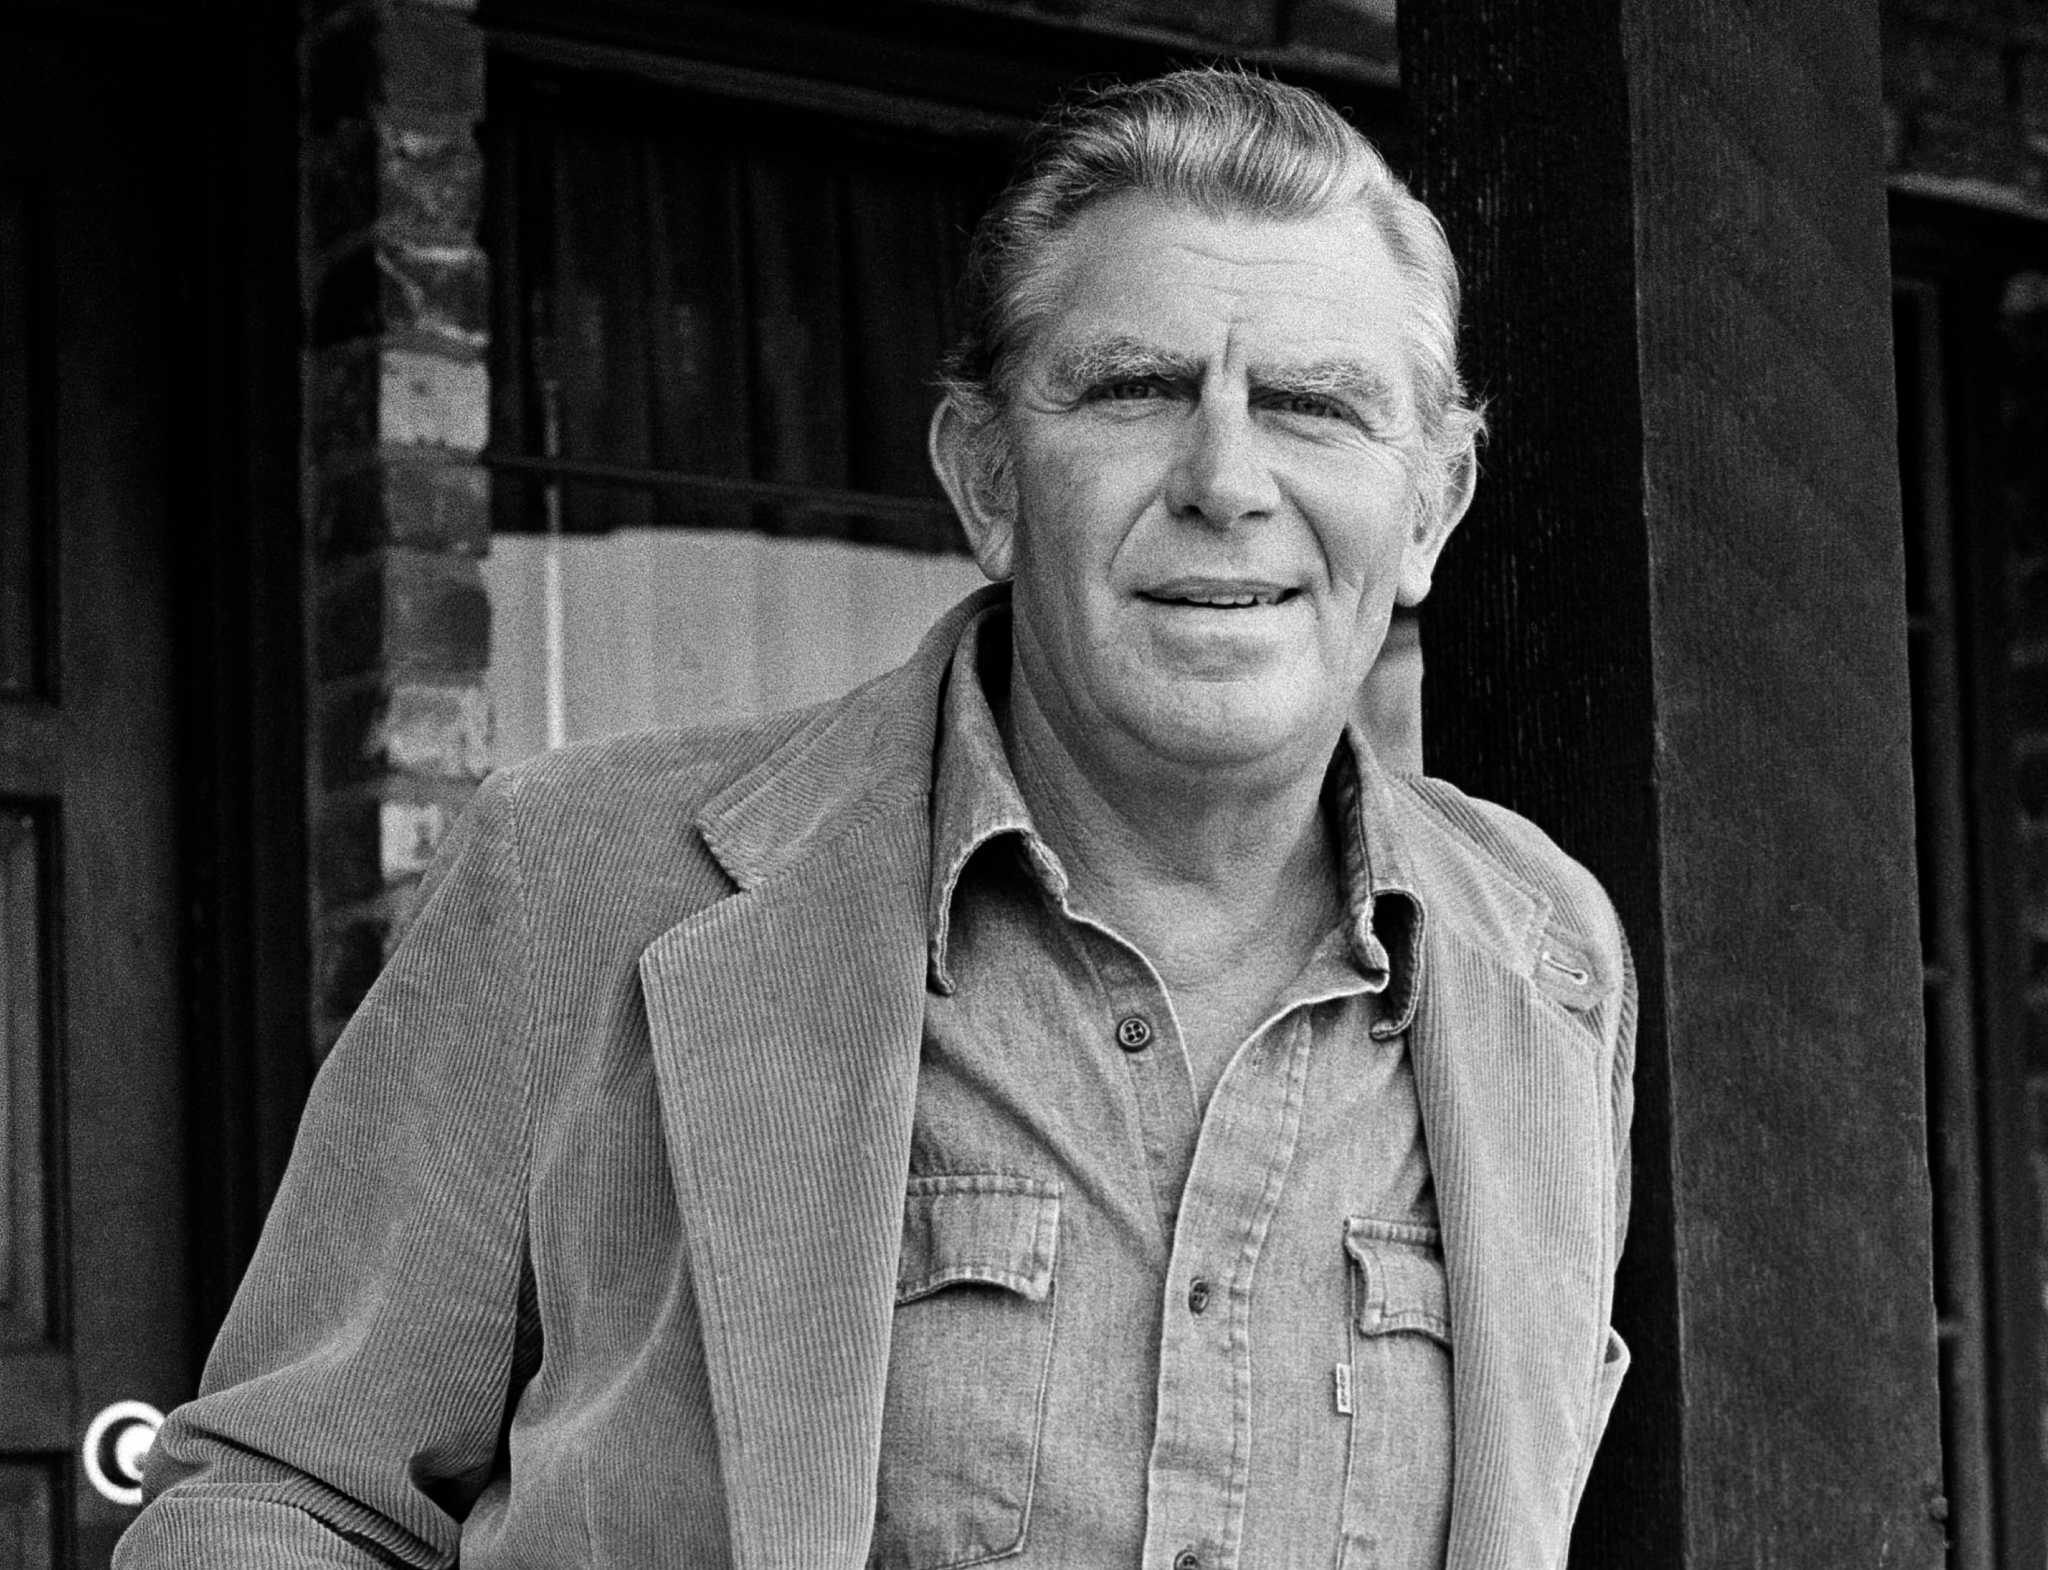 Andy Griffith dies at 86.